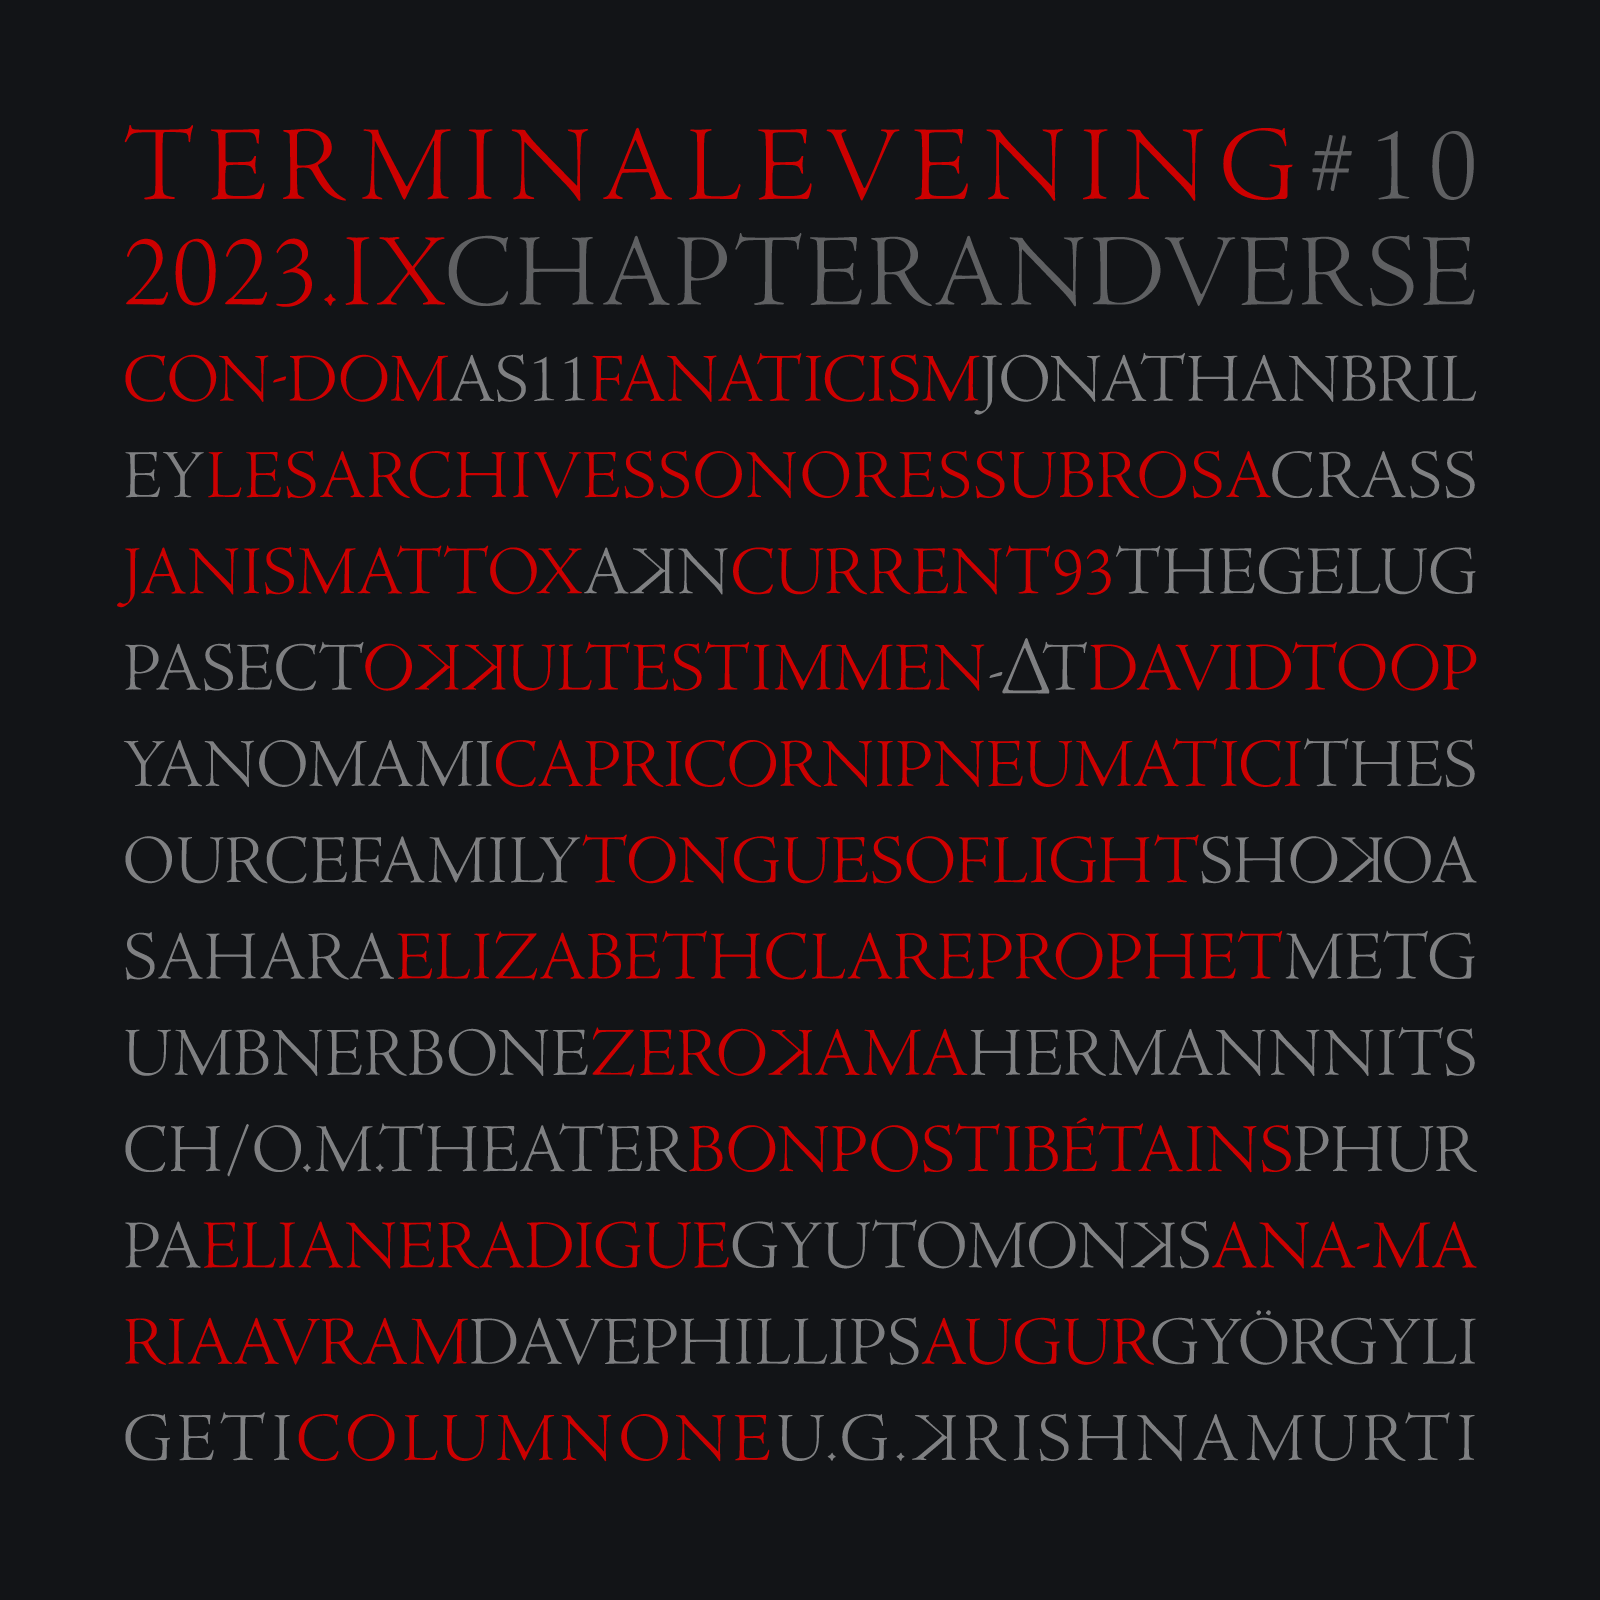 TERMINAL EVENING #10 | CHAPTER AND VERSE